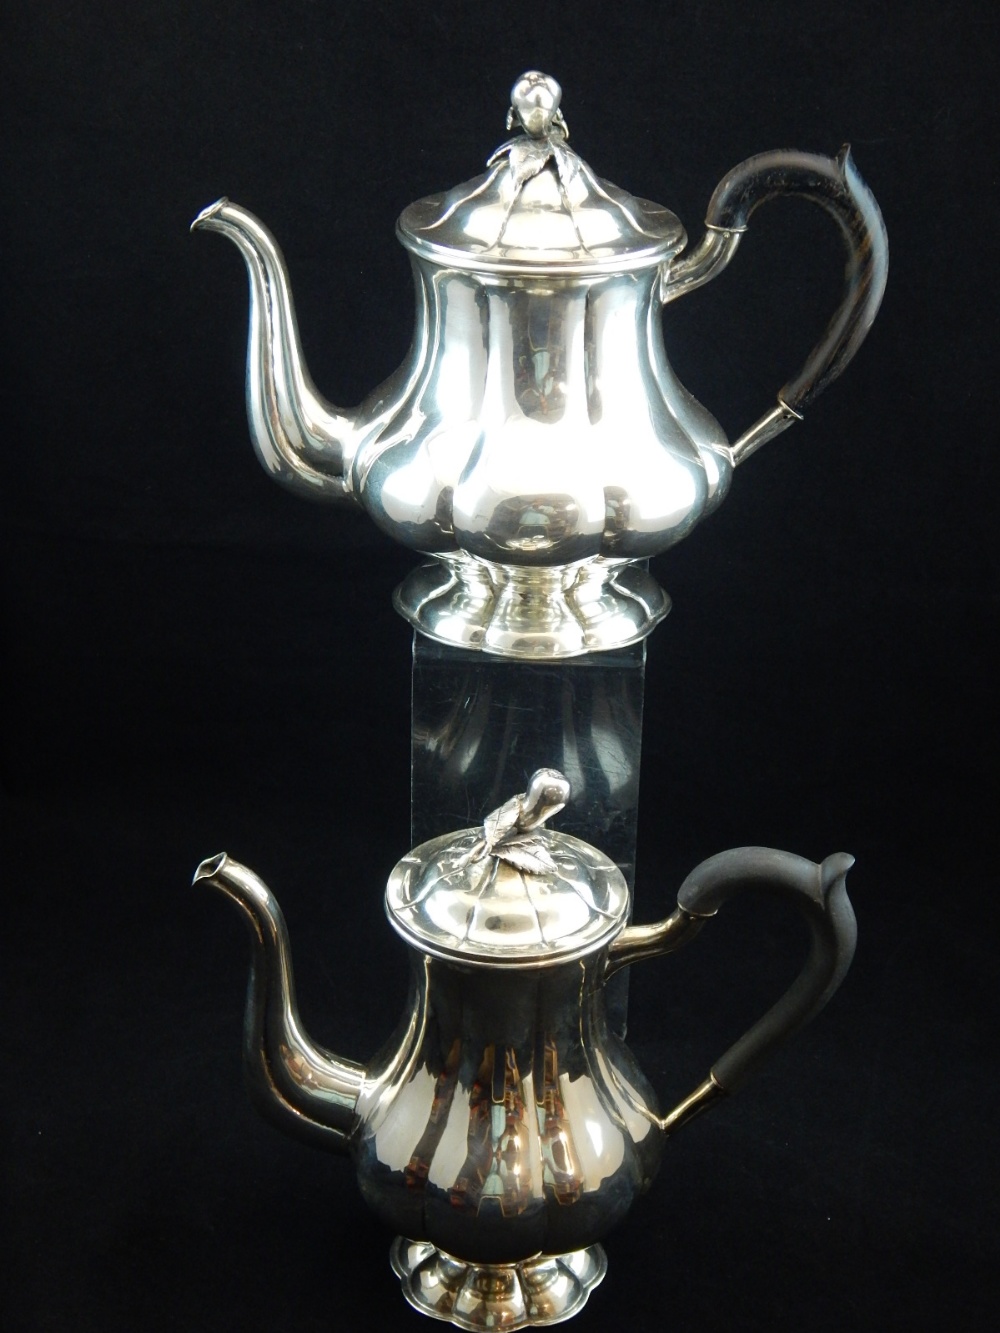 An early 20th century Austria / Hungary silver coffee pot and matching teapot, makers mark S.A, of